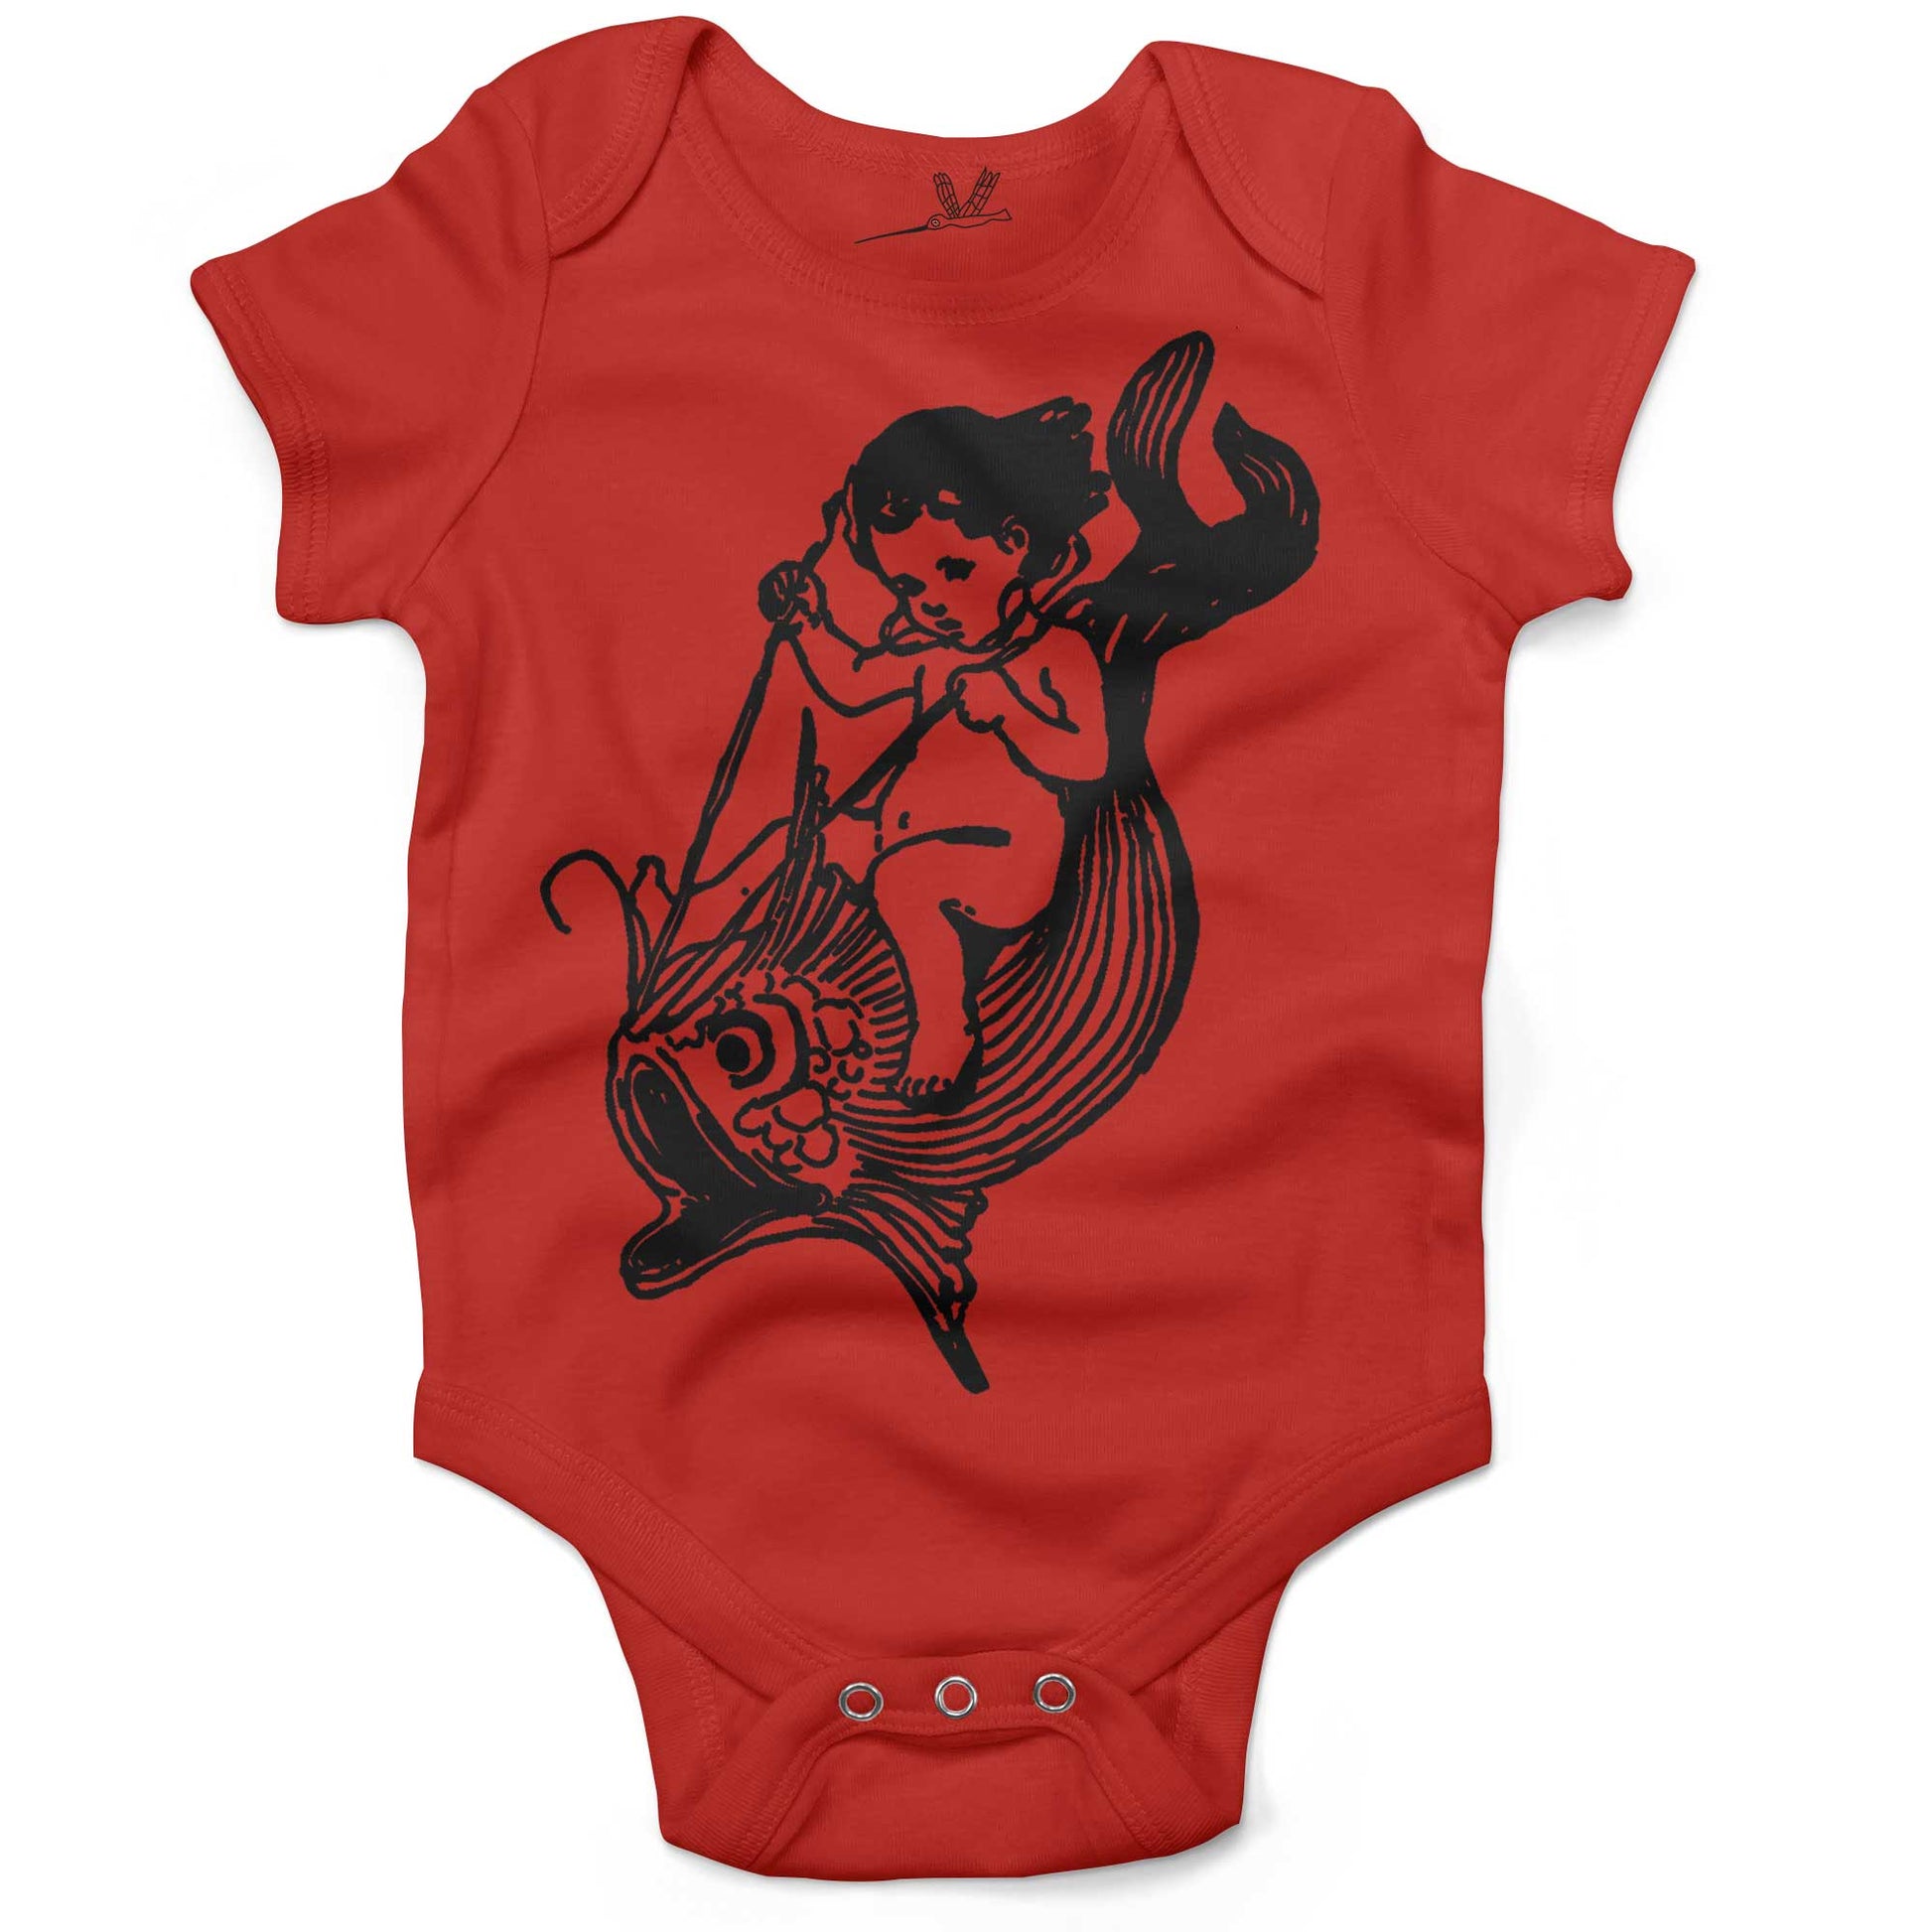 Water Baby Riding A Giant Fish Infant Bodysuit or Raglan Tee-Organic Red-3-6 months